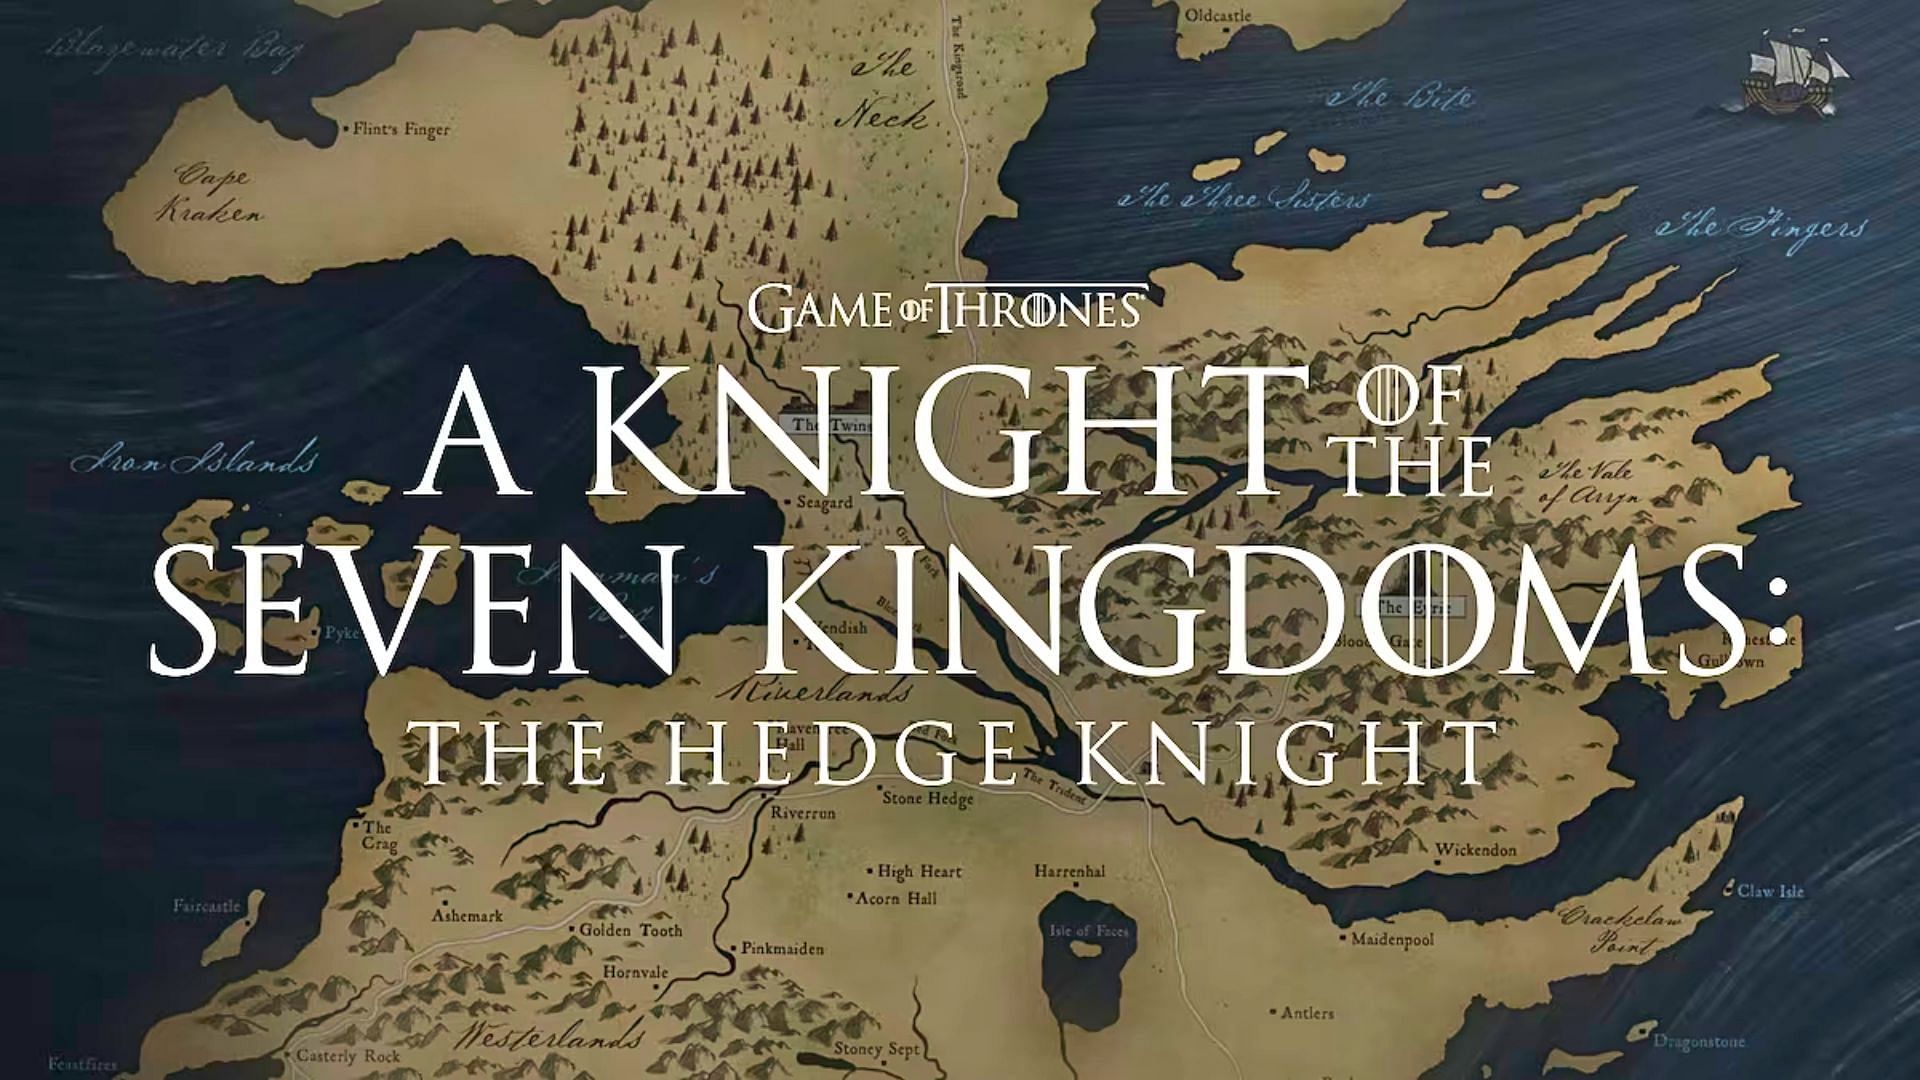 A Knight of the Seven Kingdoms: The Hedge Knight is an upcoming series based on the short stories by George R.R. Martin (Image via HBO)